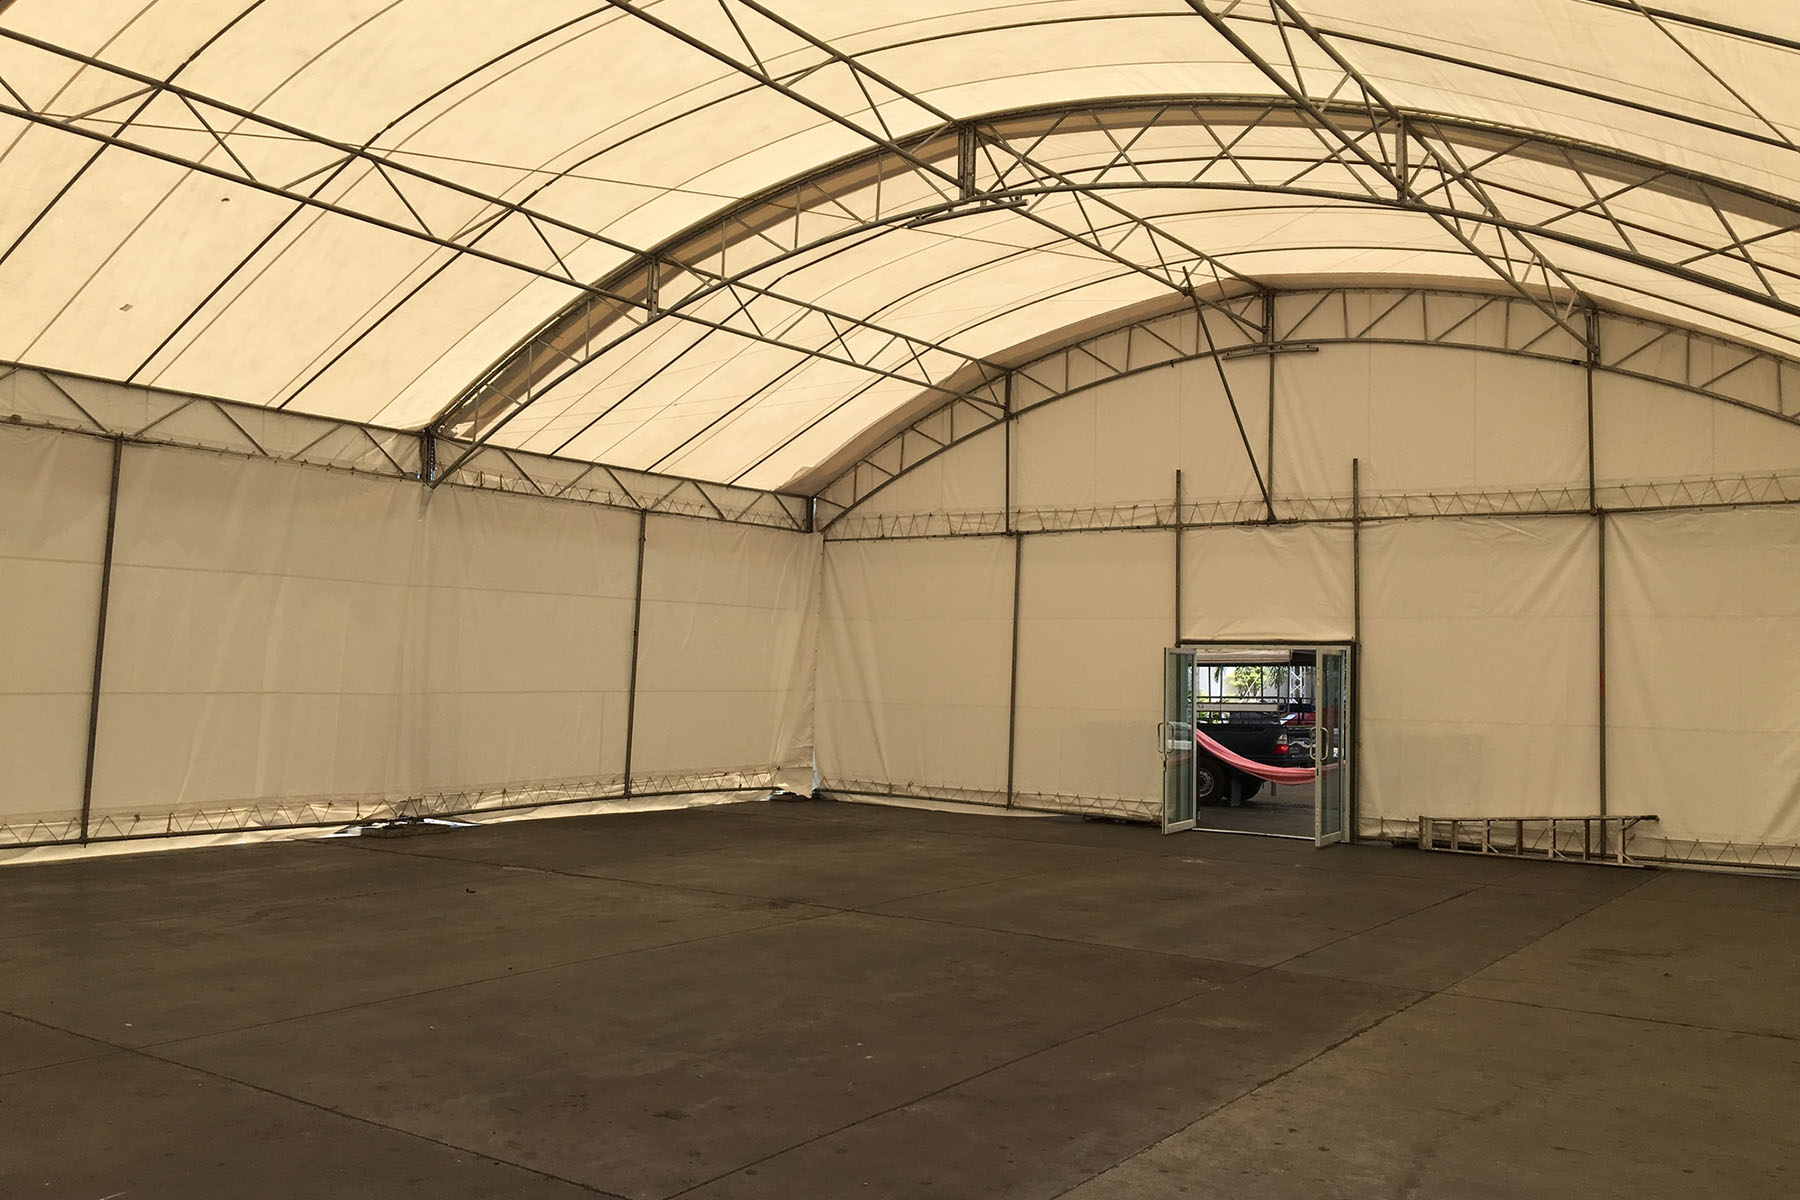 Marquee & Tent Hire Birmingham & West Midlands | GN Marquee & Tent Hire